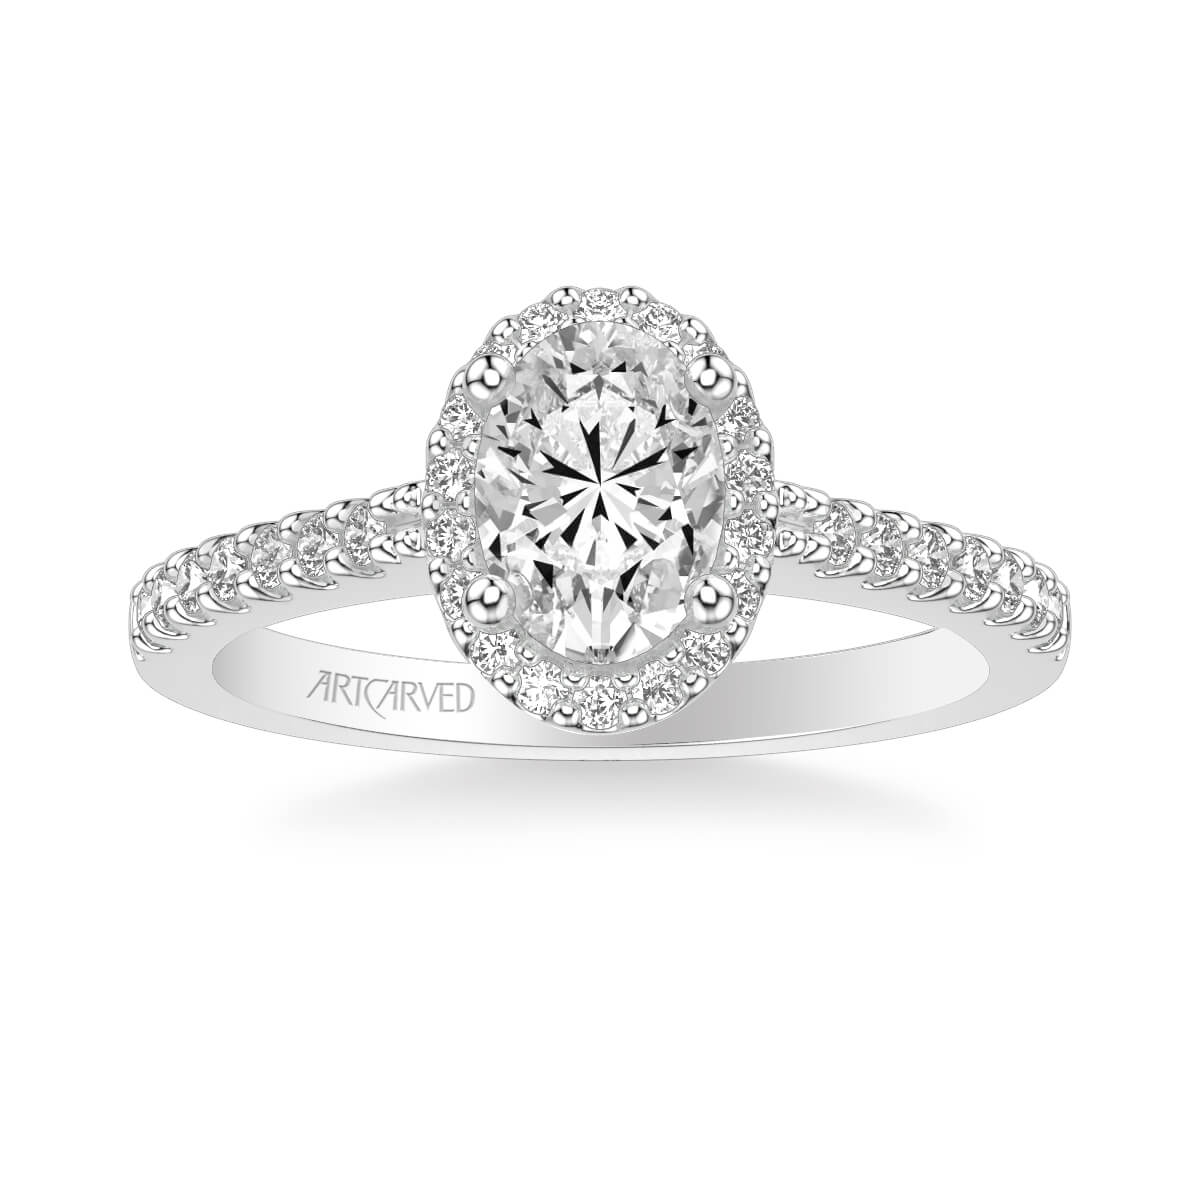 How to add diamonds to an existing ring